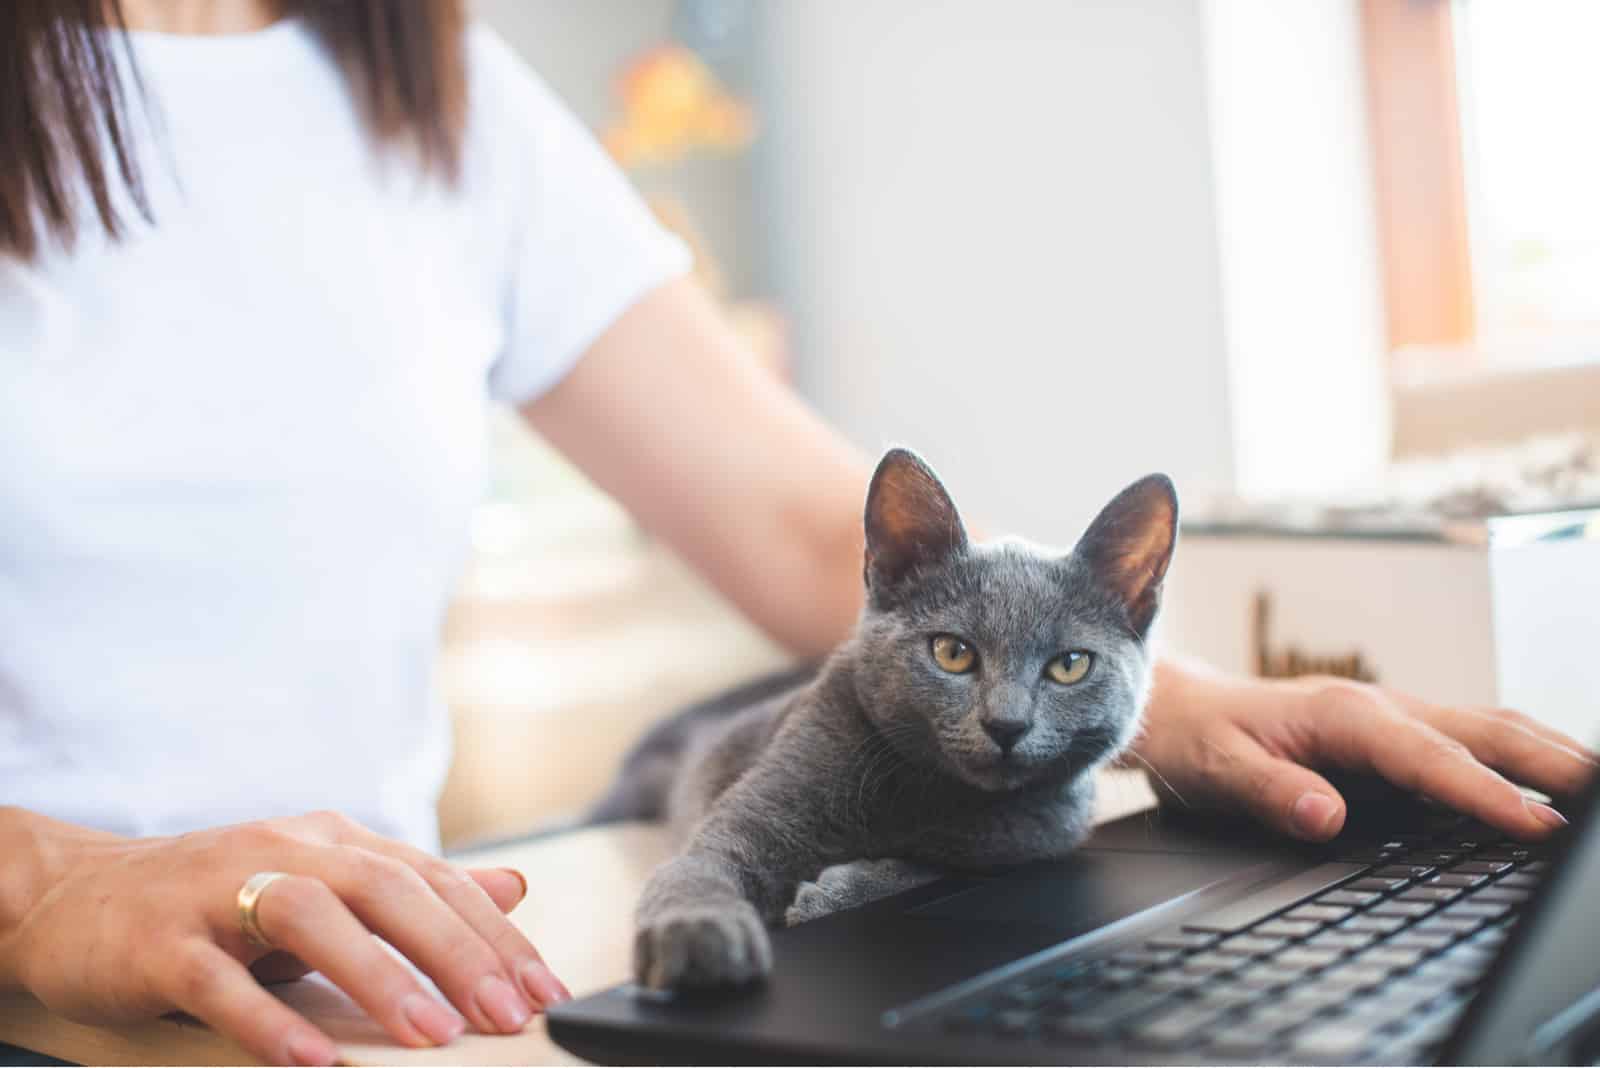 a woman working on a laptop cat bothers her